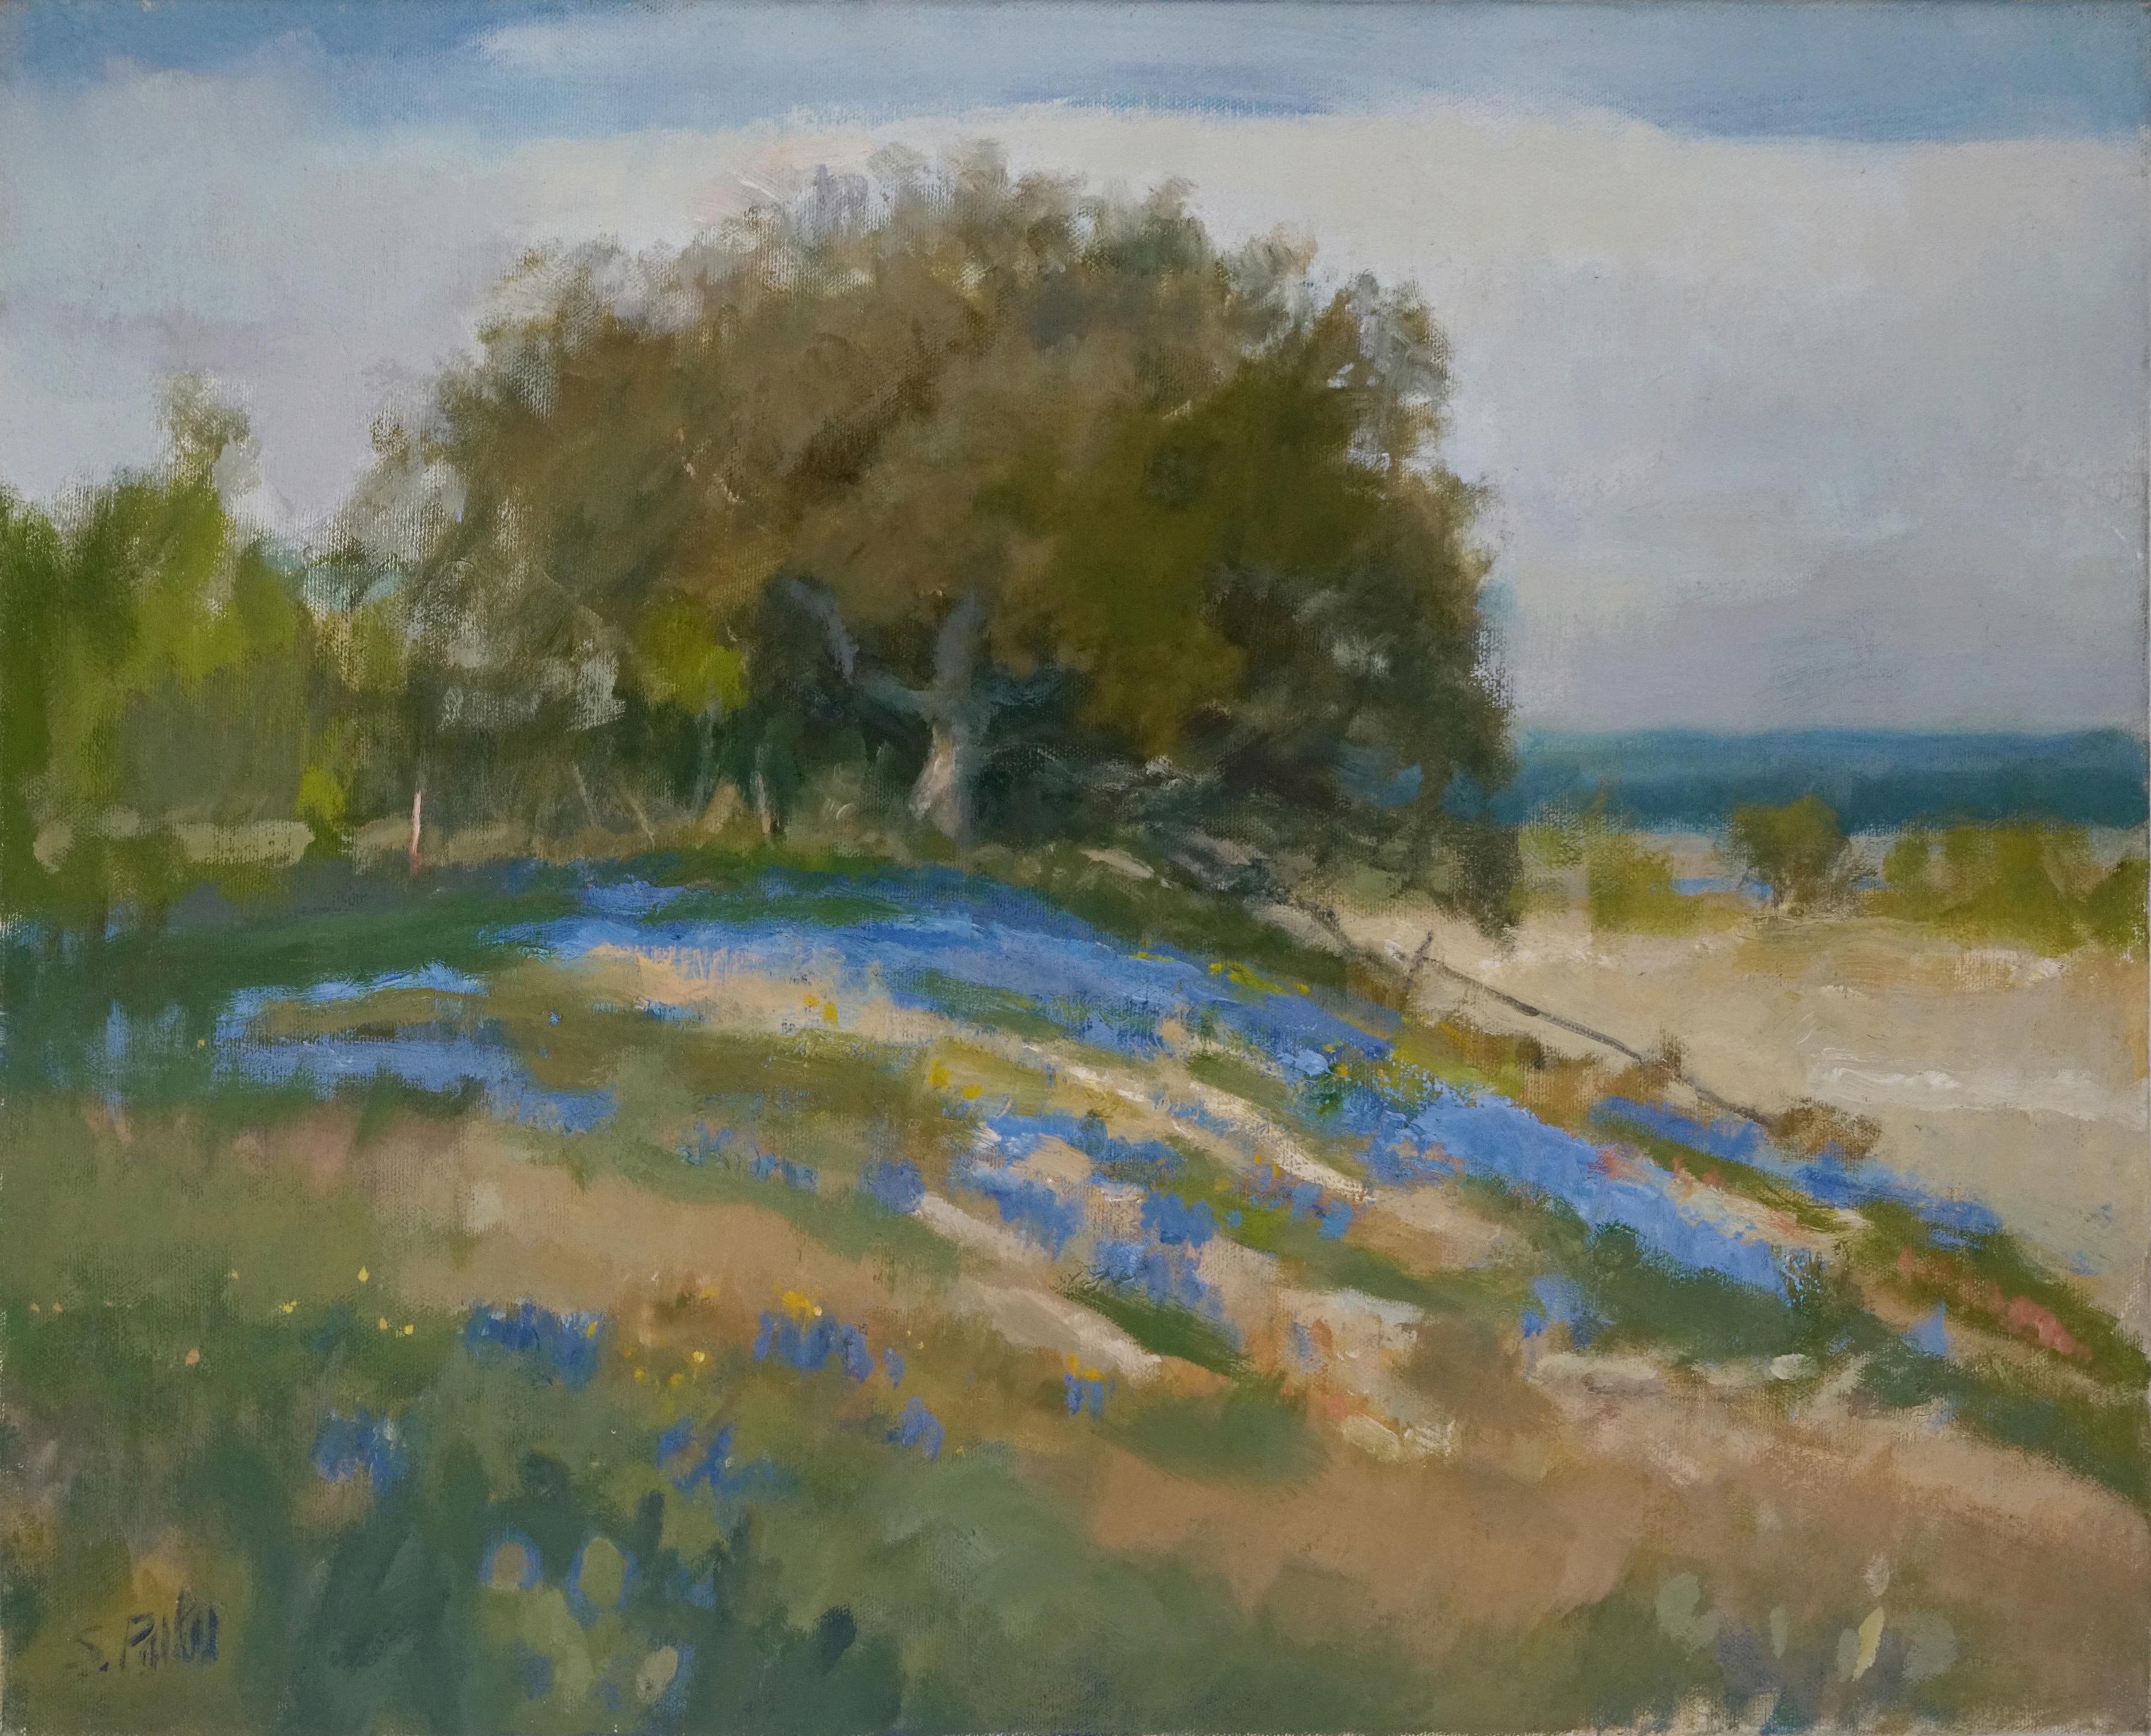 Oaks & Bluebonnets , Oil Paint, Weimar Texas, Impressionism, Texas Hill Country. - Painting by Steve Parker